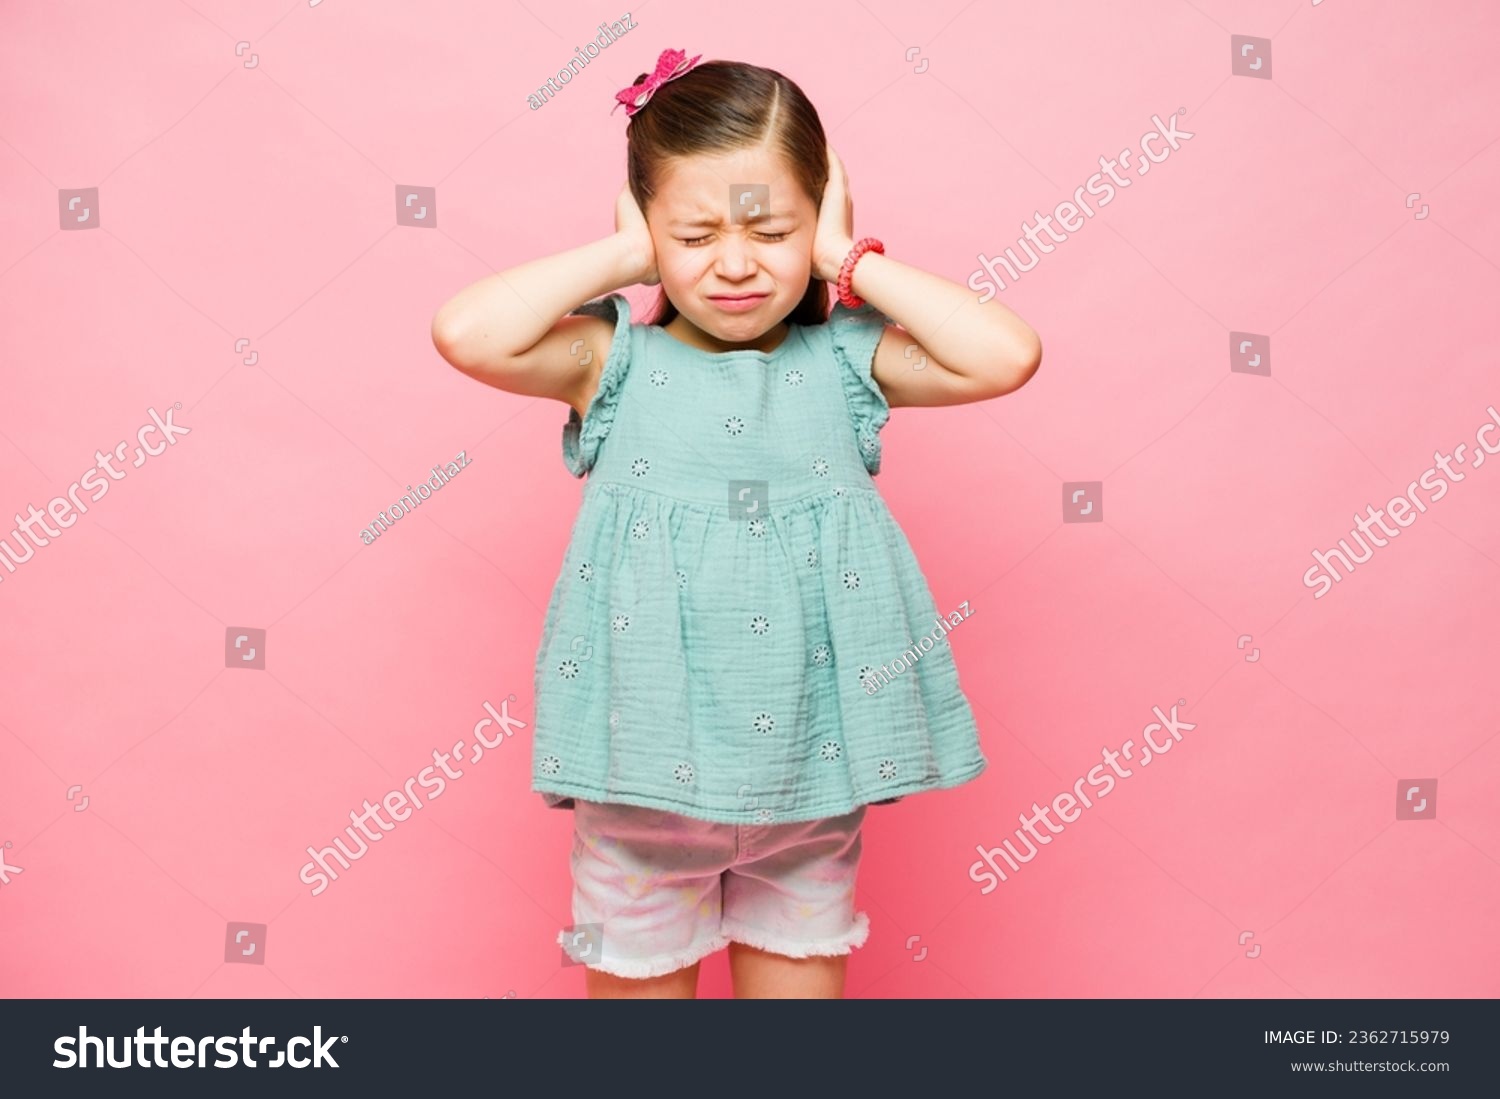 Annoyed elementary little kid feeling upset because of loud noises covering her ears against a pink studio background #2362715979